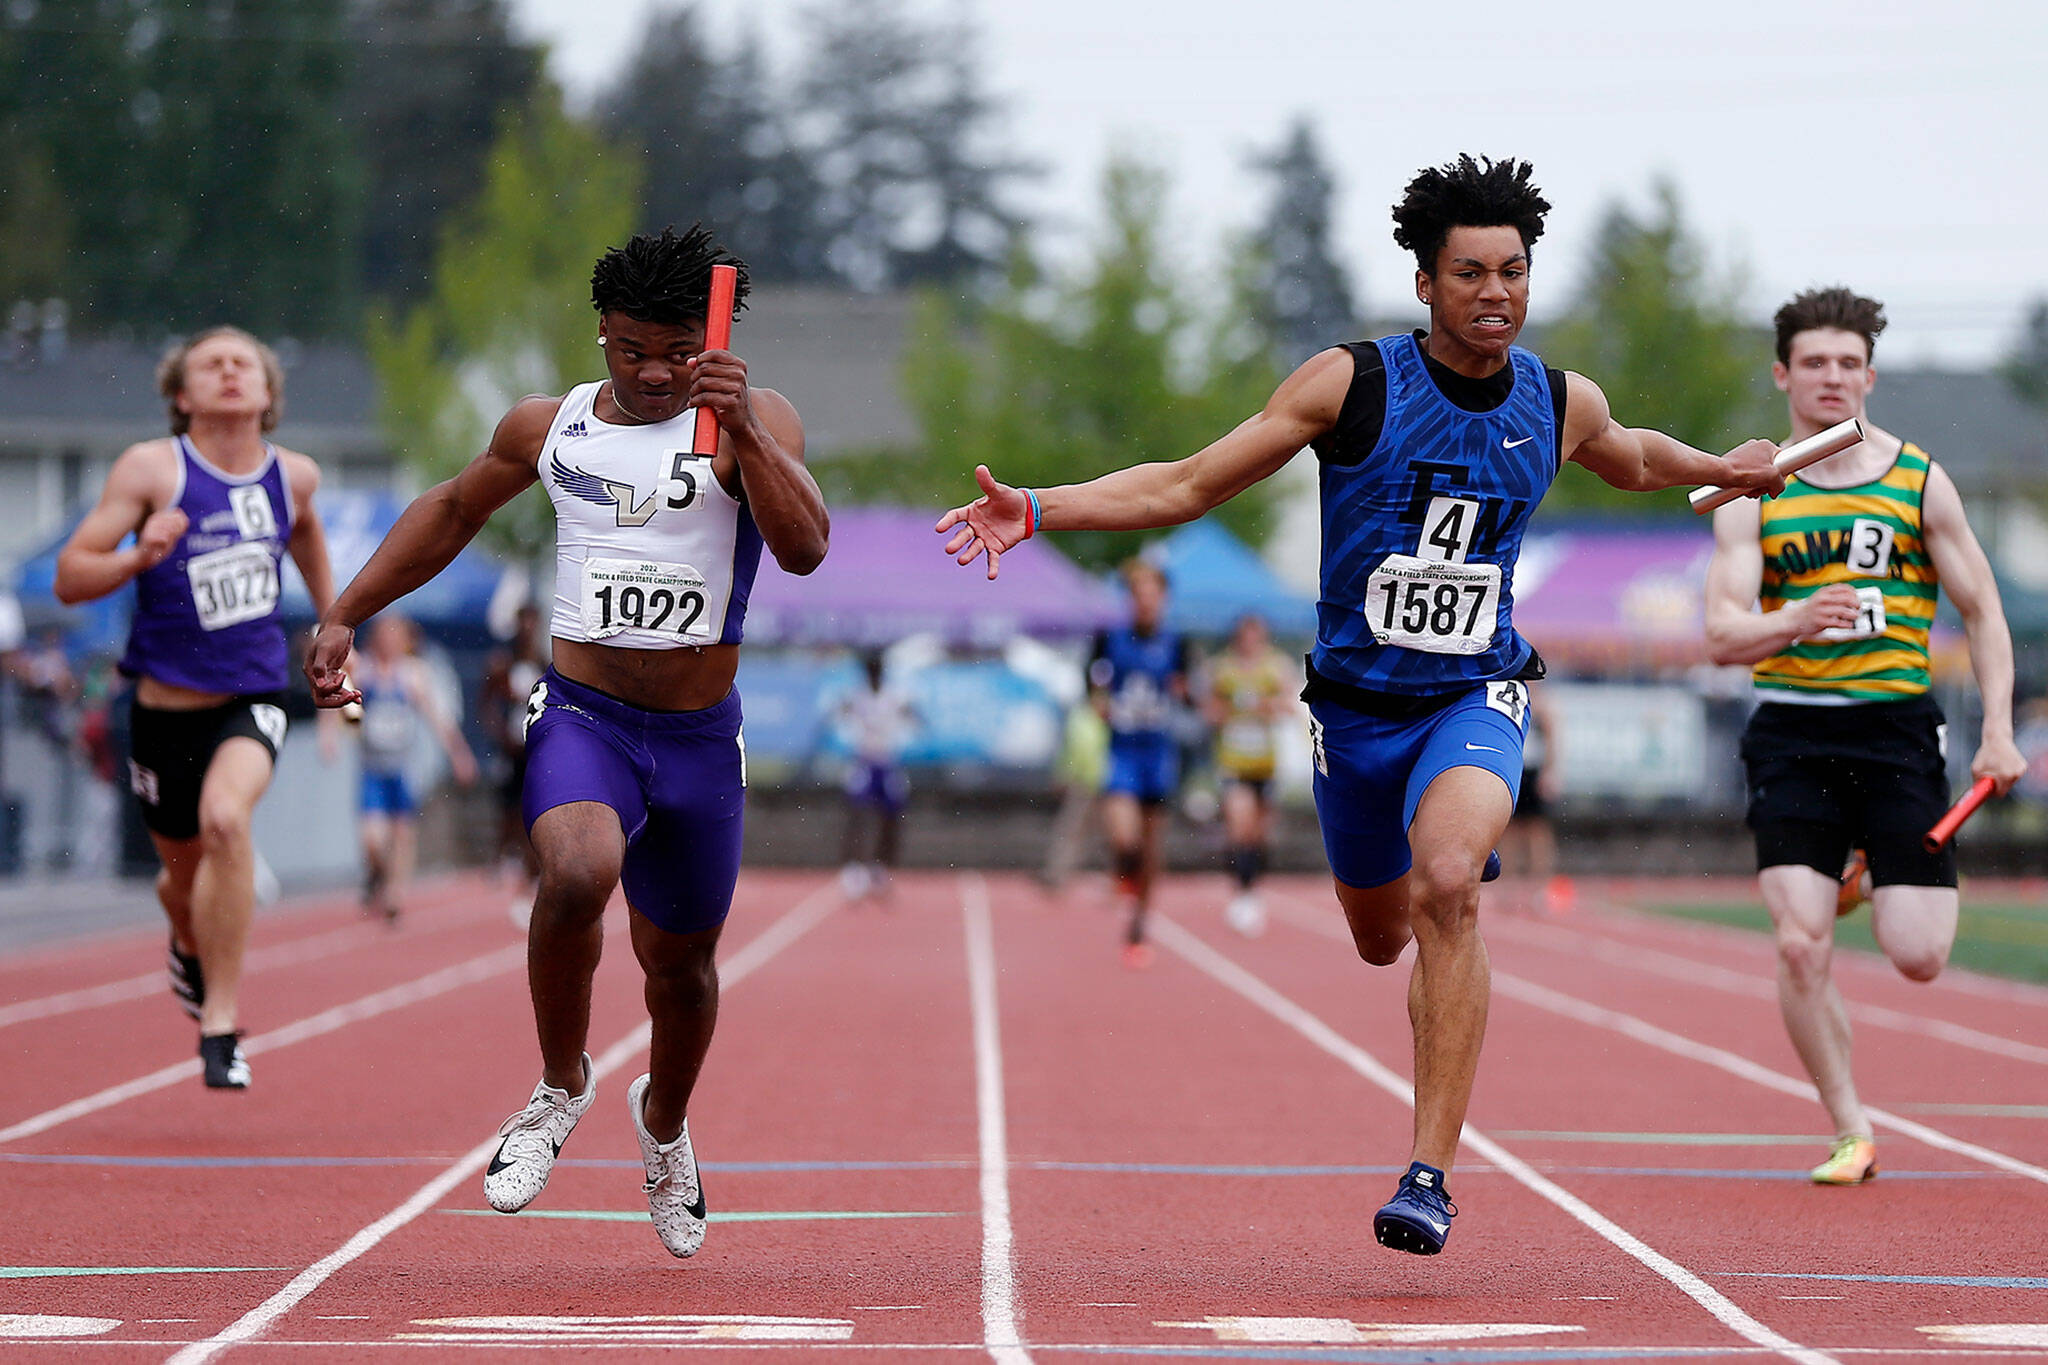 Lake Stevens’ Trayce Hanks, left, finishes off his team’s win in the 4A boys 4X100 relay Saturday, May 28, 2022, at the 2022 WIAA State Track & Field Championships at Mount Tahoma High School in Tacoma, Washington. (Ryan Berry / The Herald)